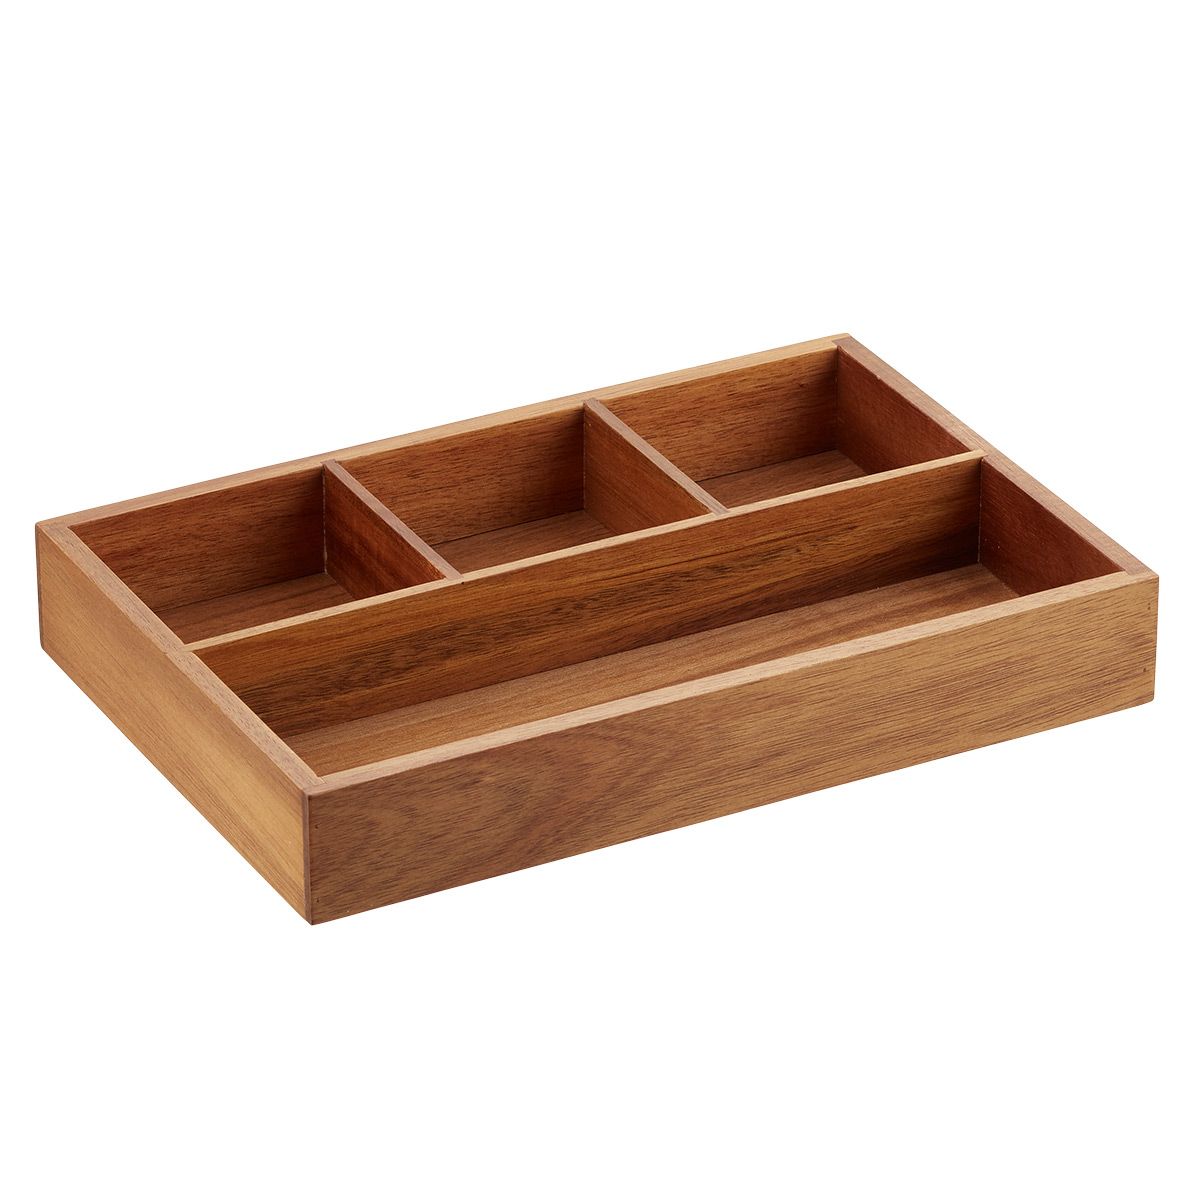 Rowan Acacia Drawer Organizers | The Container Store